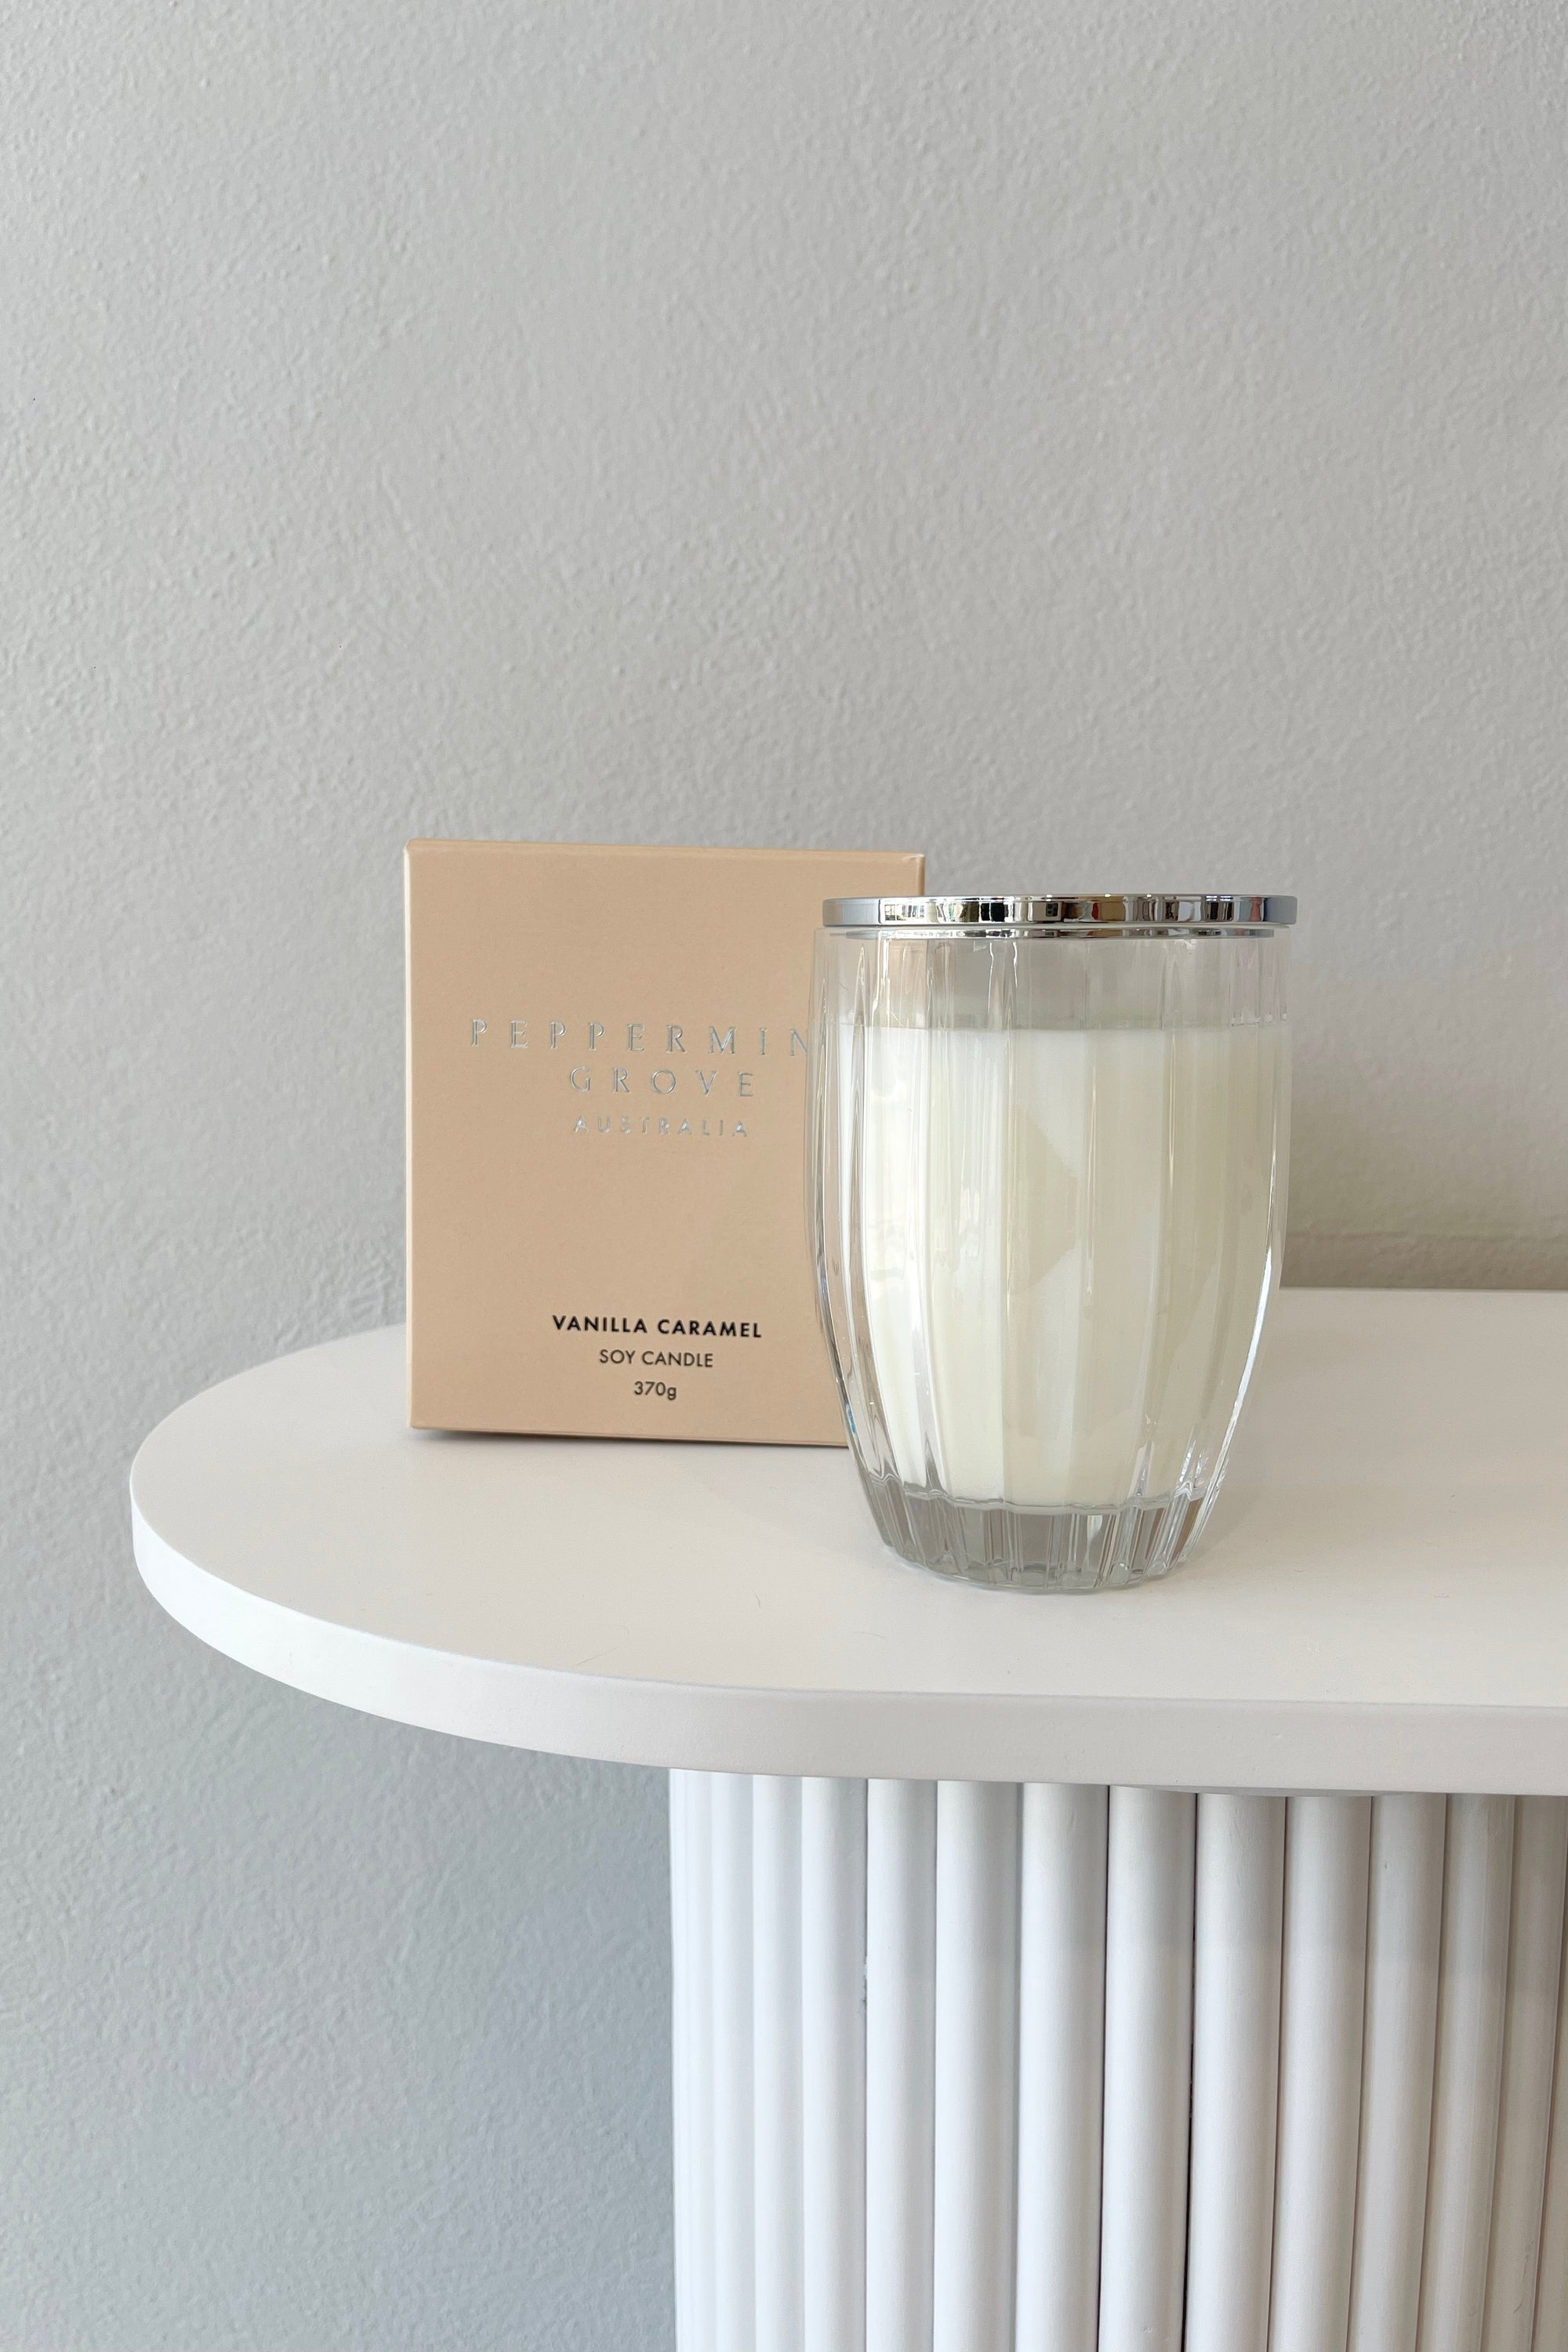 Peppermint Grove Soy Candle | Vanilla Caramel